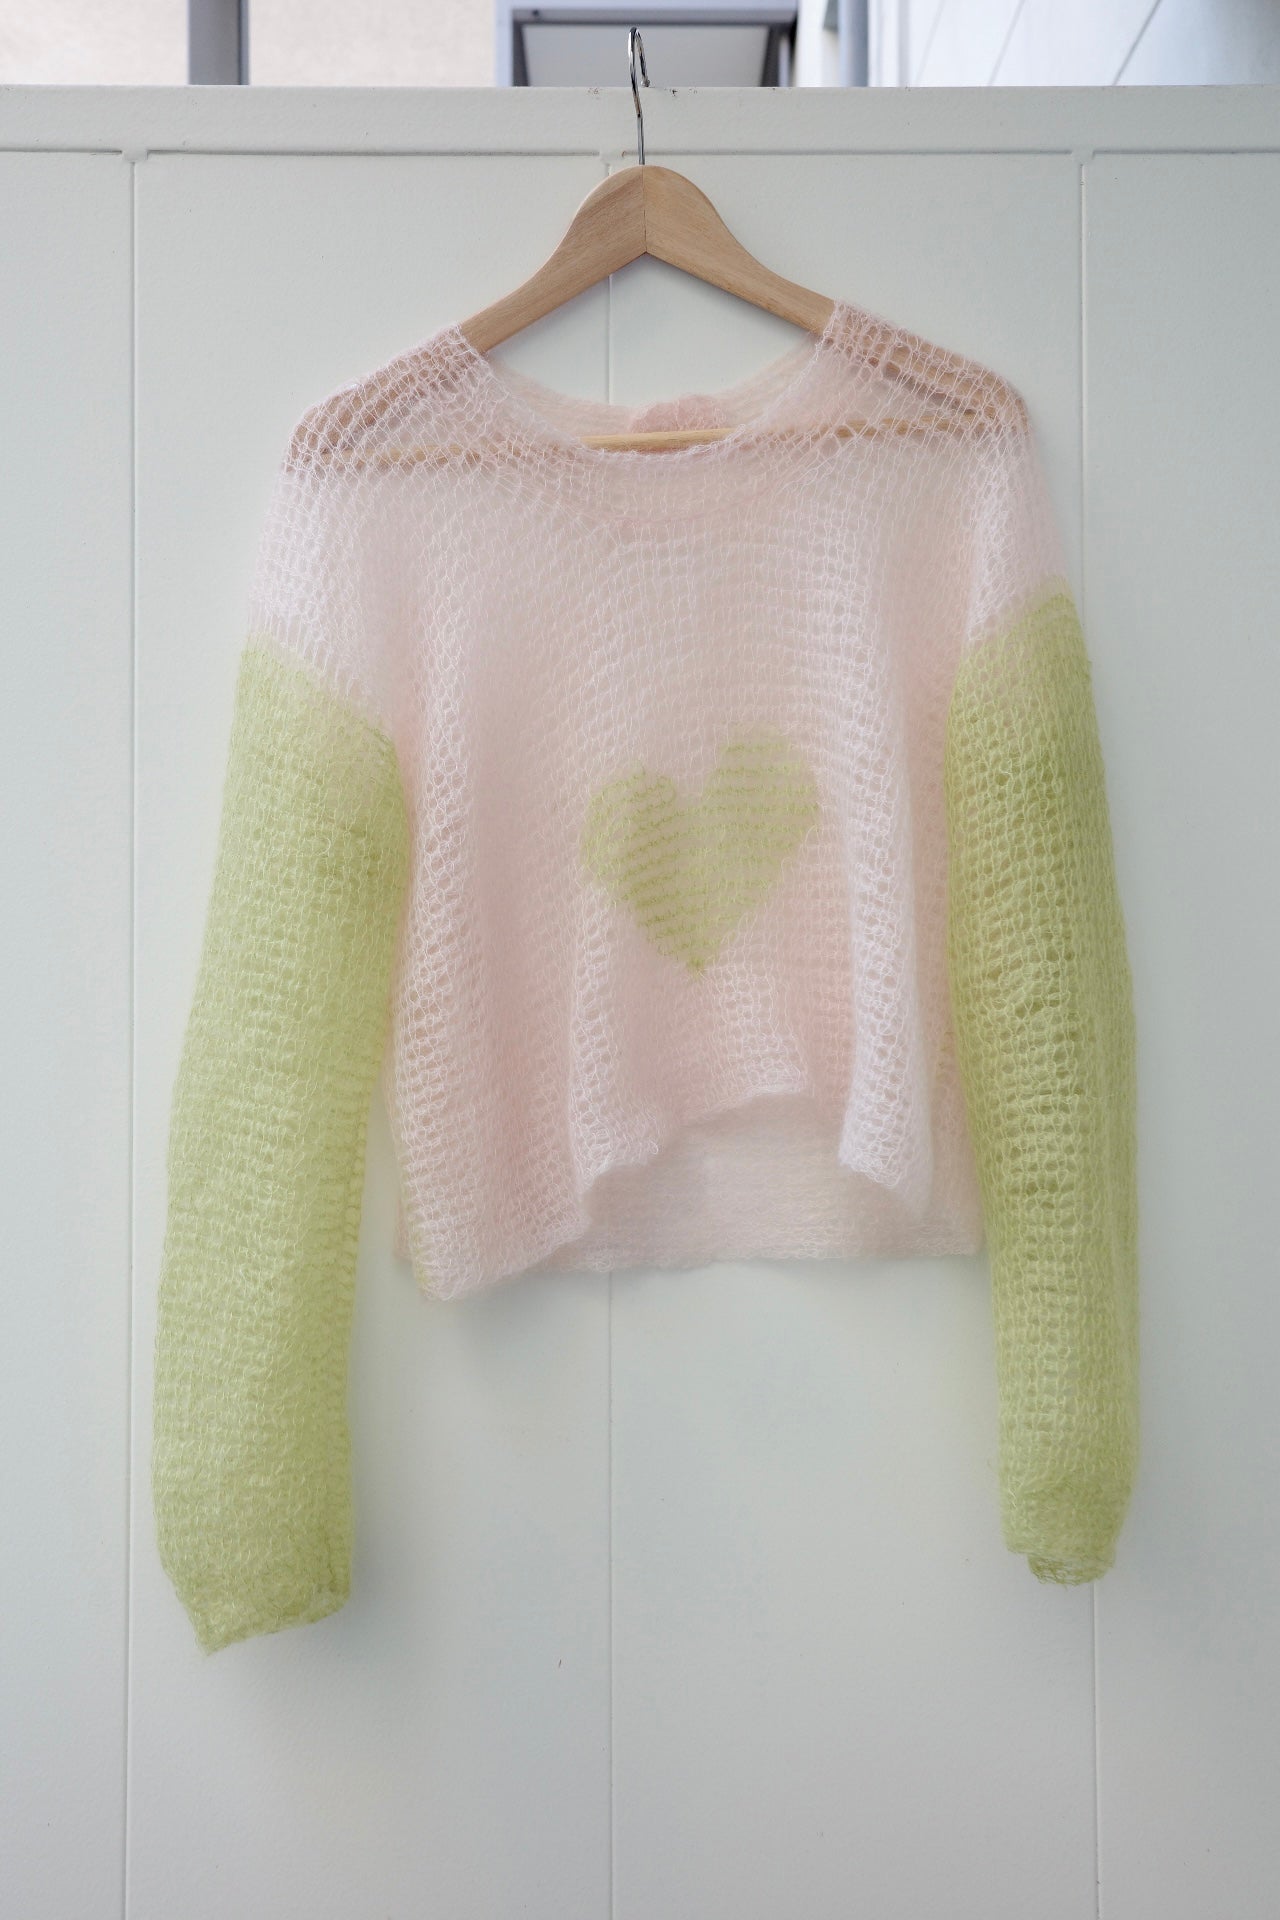 "The Heart" Sweater